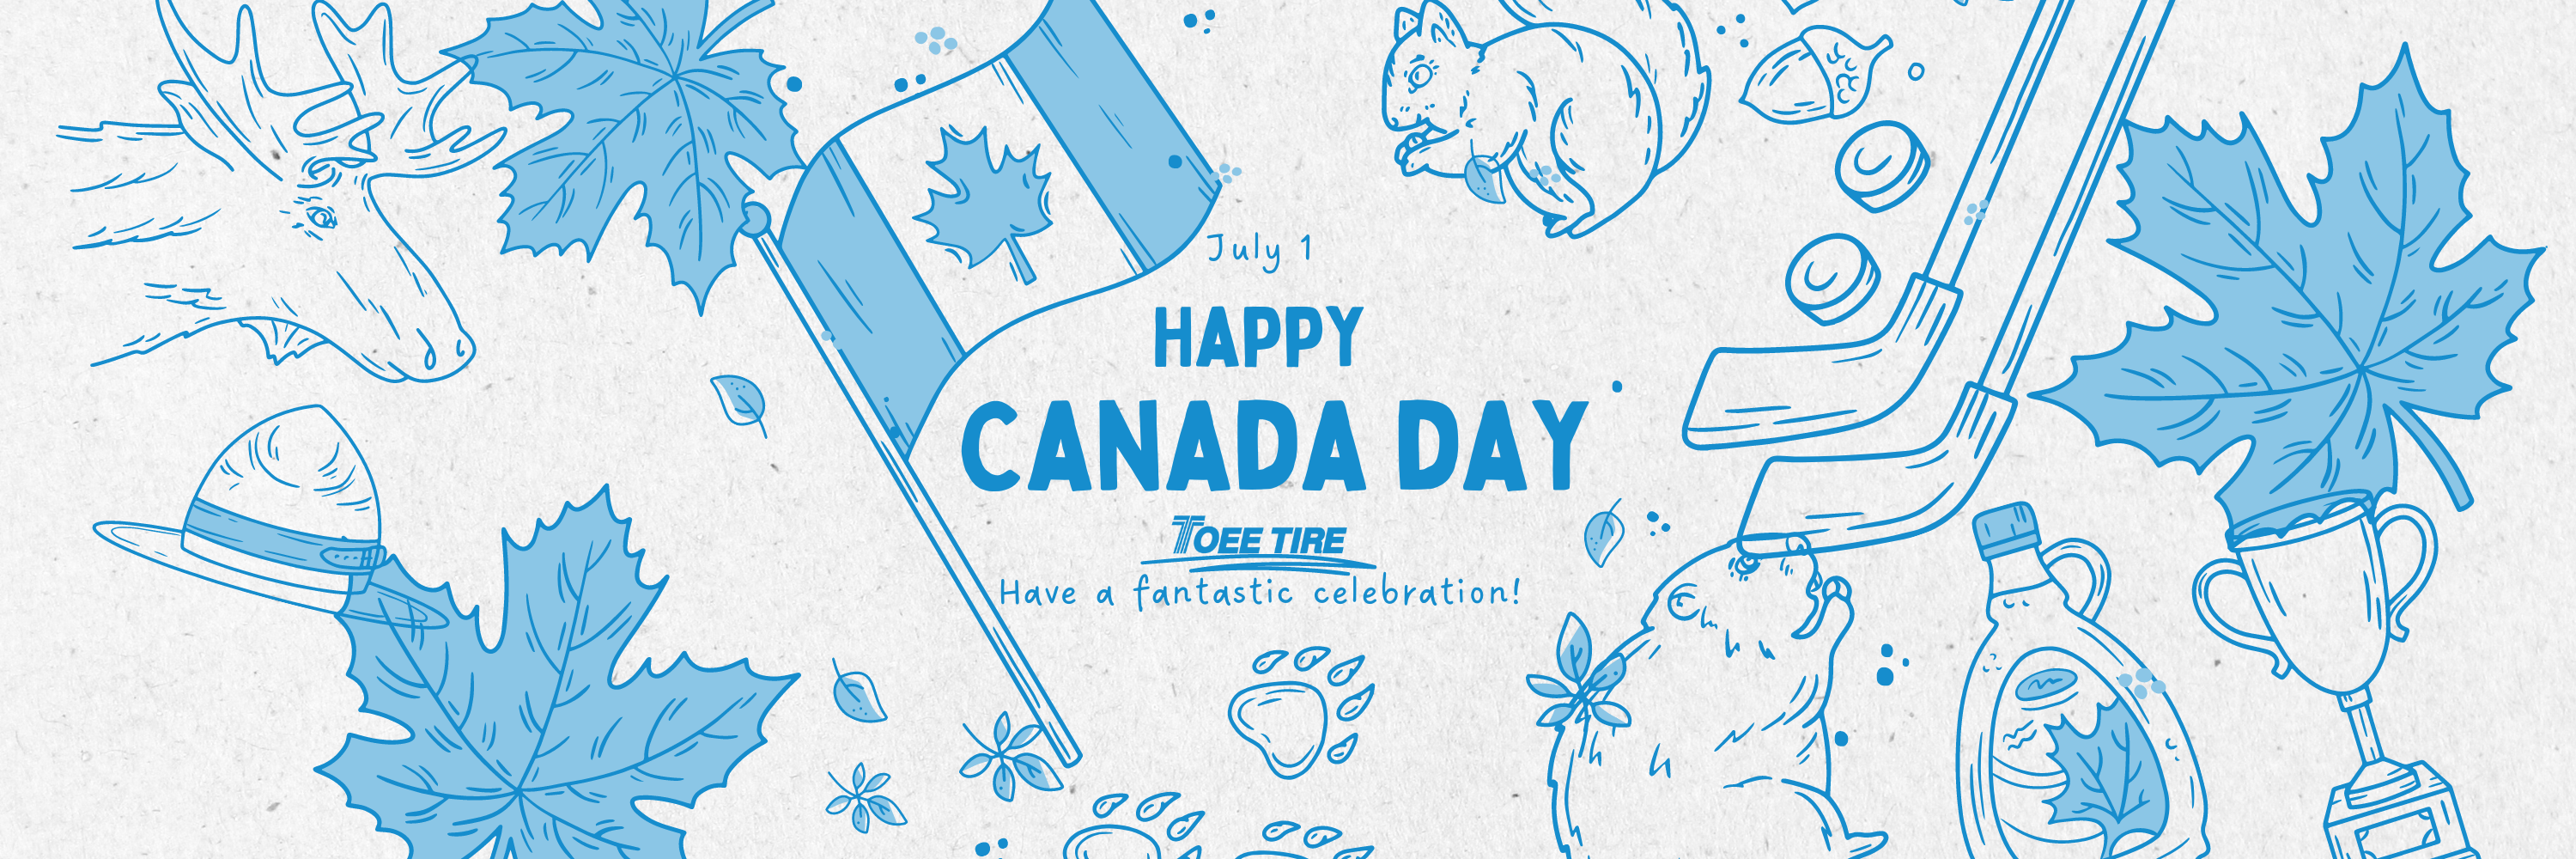 Happy canada day on july 1 red greeting facebook post 8a0eef05 99d0 47c1 b16b 5c7a64442c50